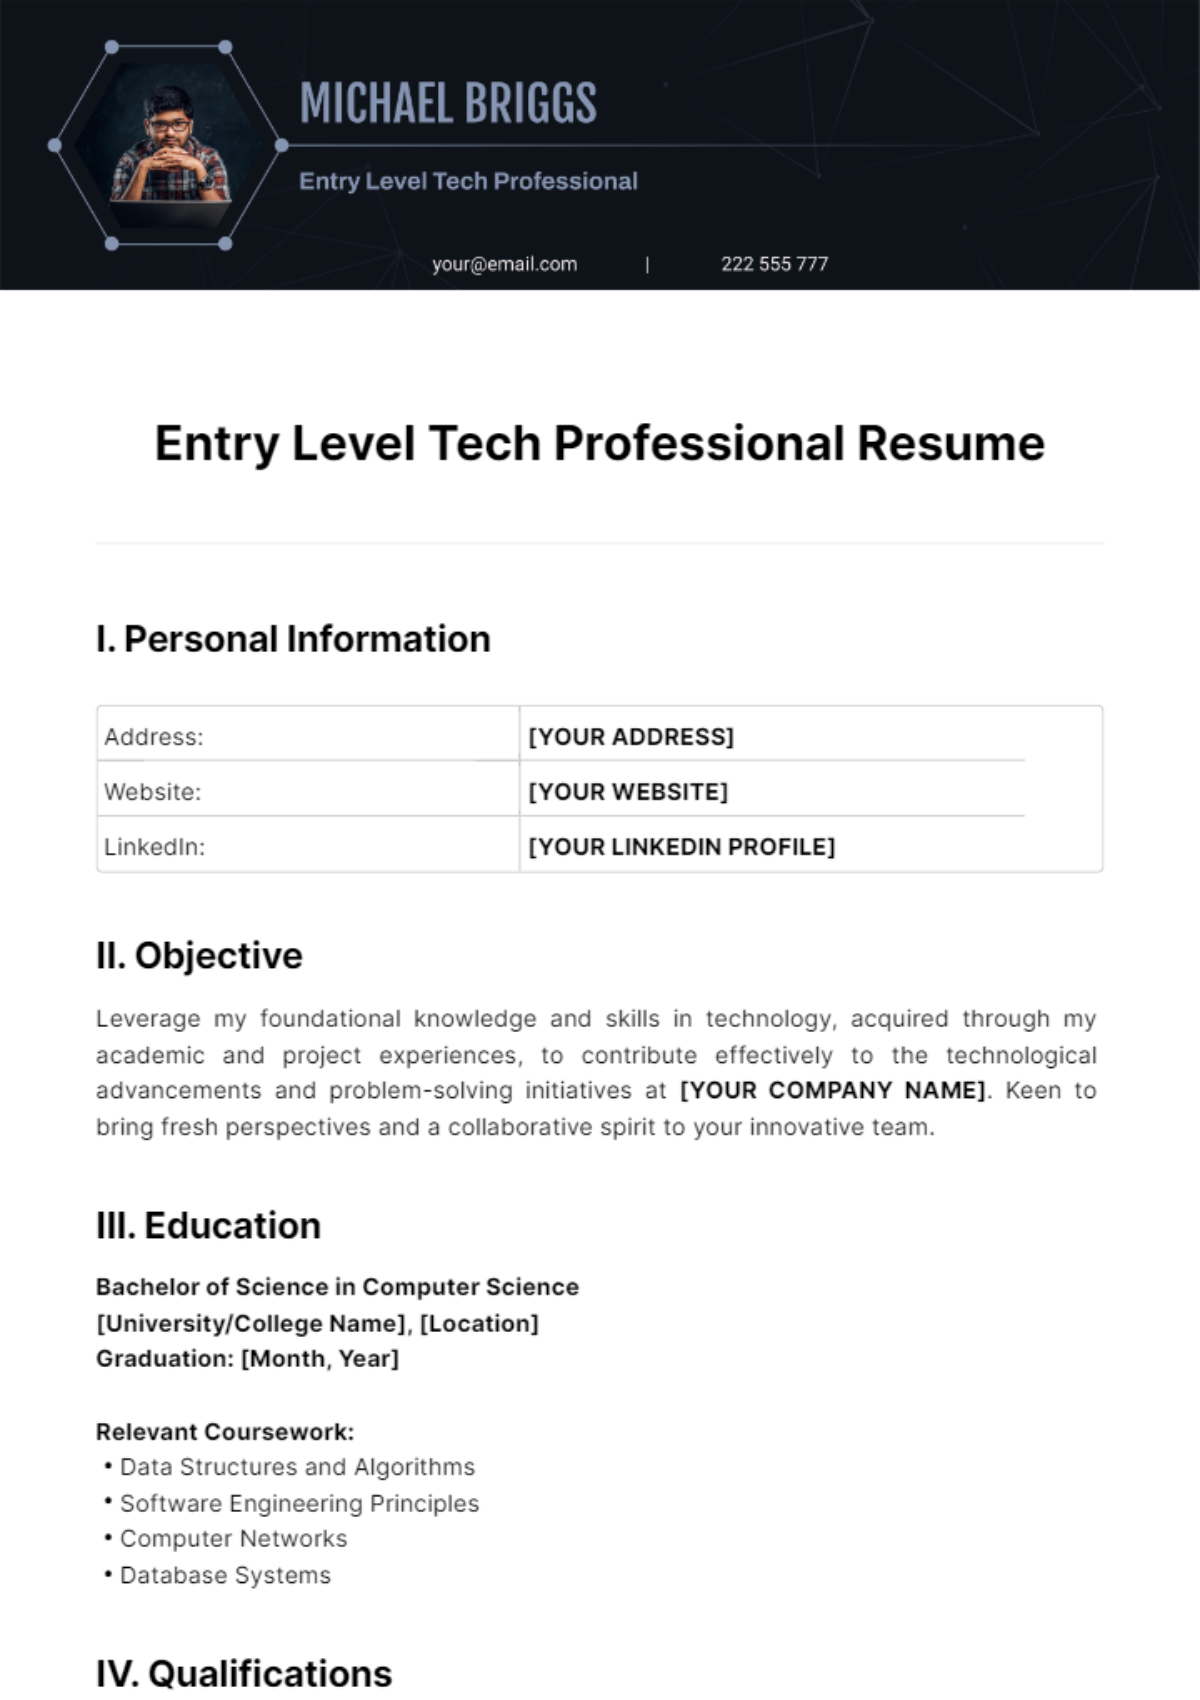 Entry Level Tech Professional Resume Template